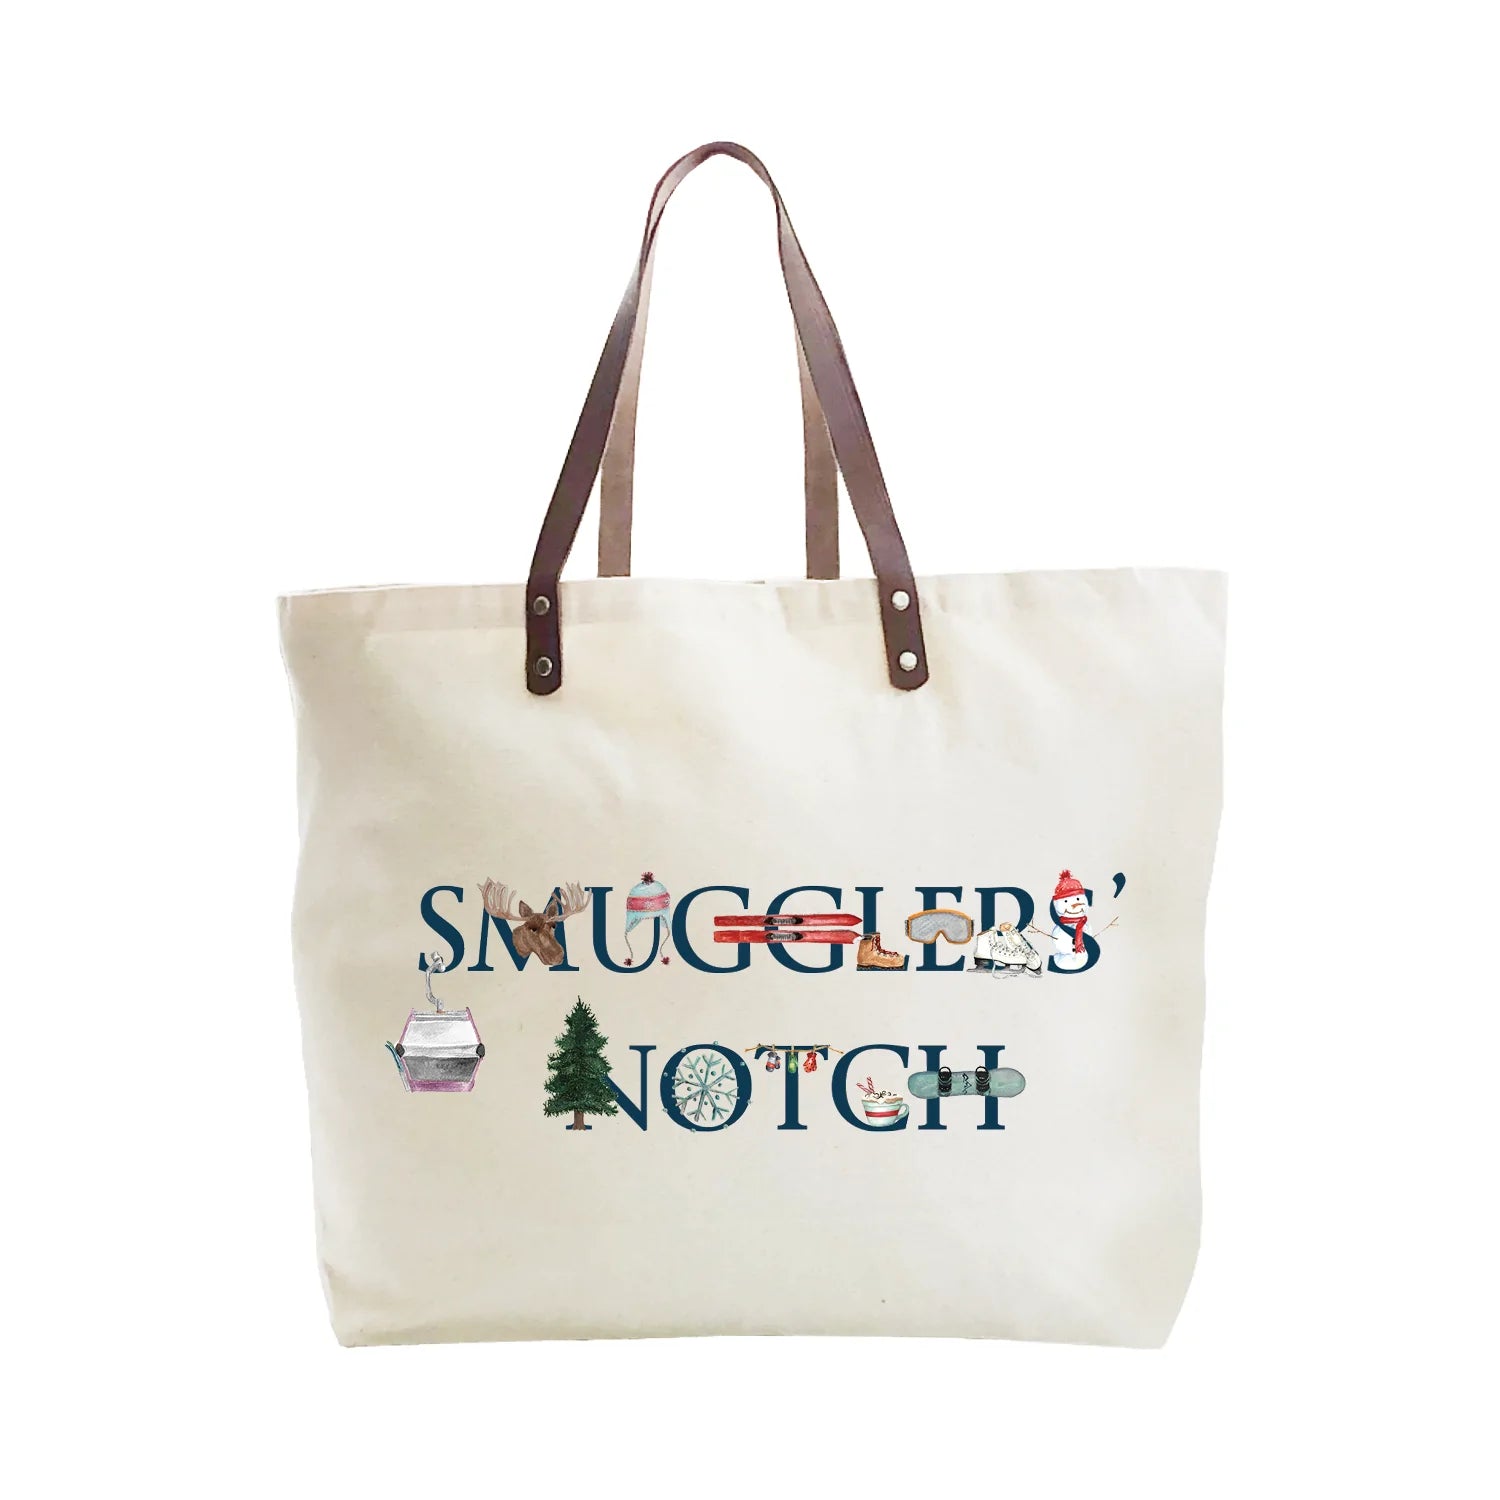 smugglers' notch large tote